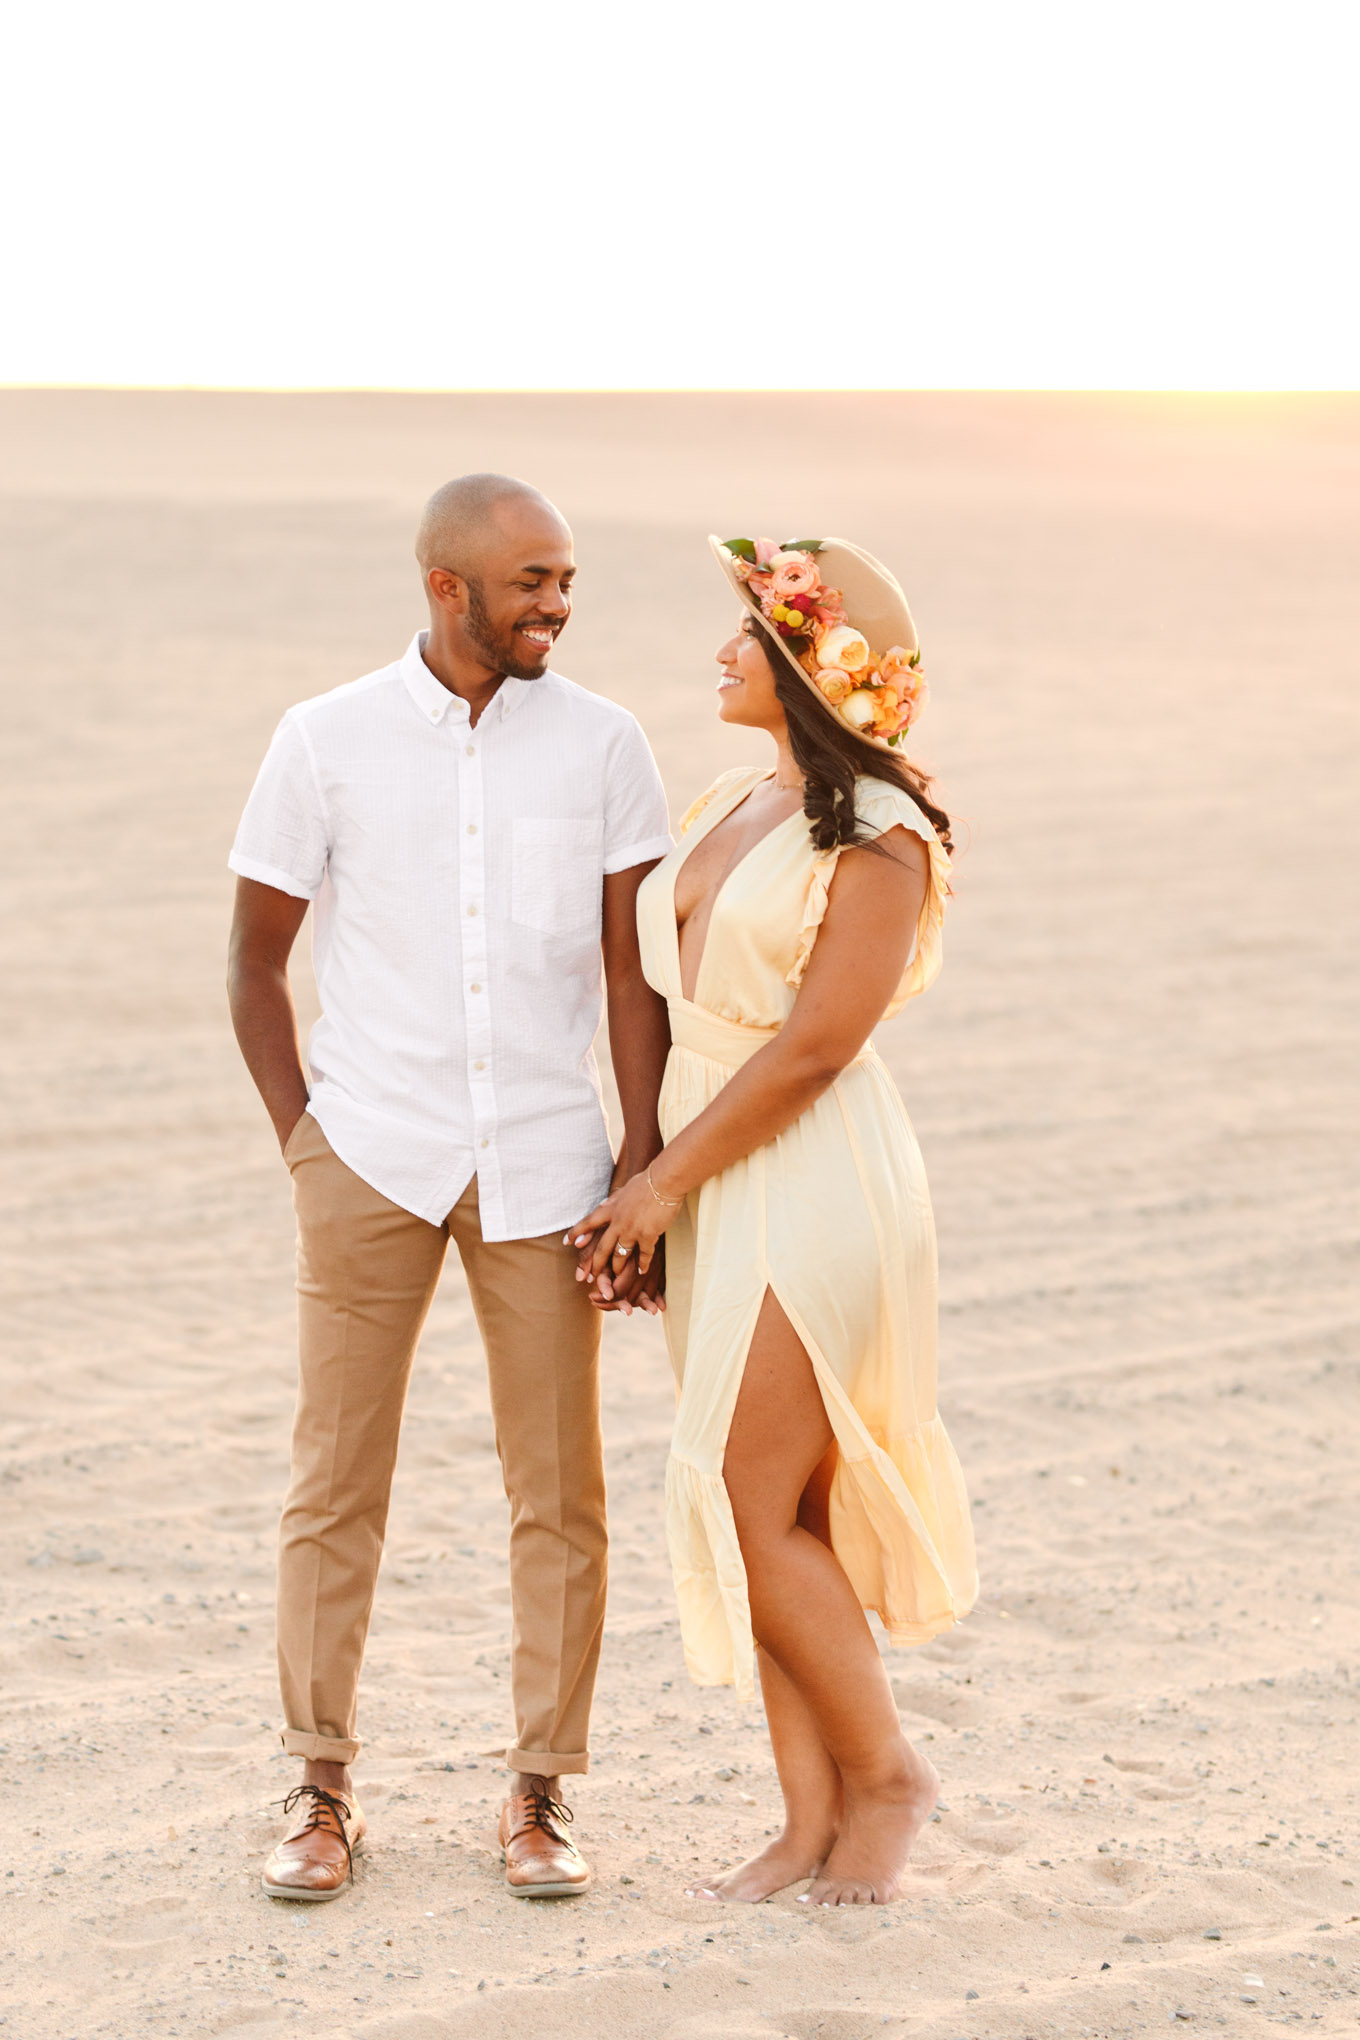 Bride to be wearing a hat at a sand dune | California Sand Dunes engagement session | Colorful Palm Springs wedding photography | #palmspringsphotographer #sanddunes #engagementsession #southerncalifornia  Source: Mary Costa Photography | Los Angeles